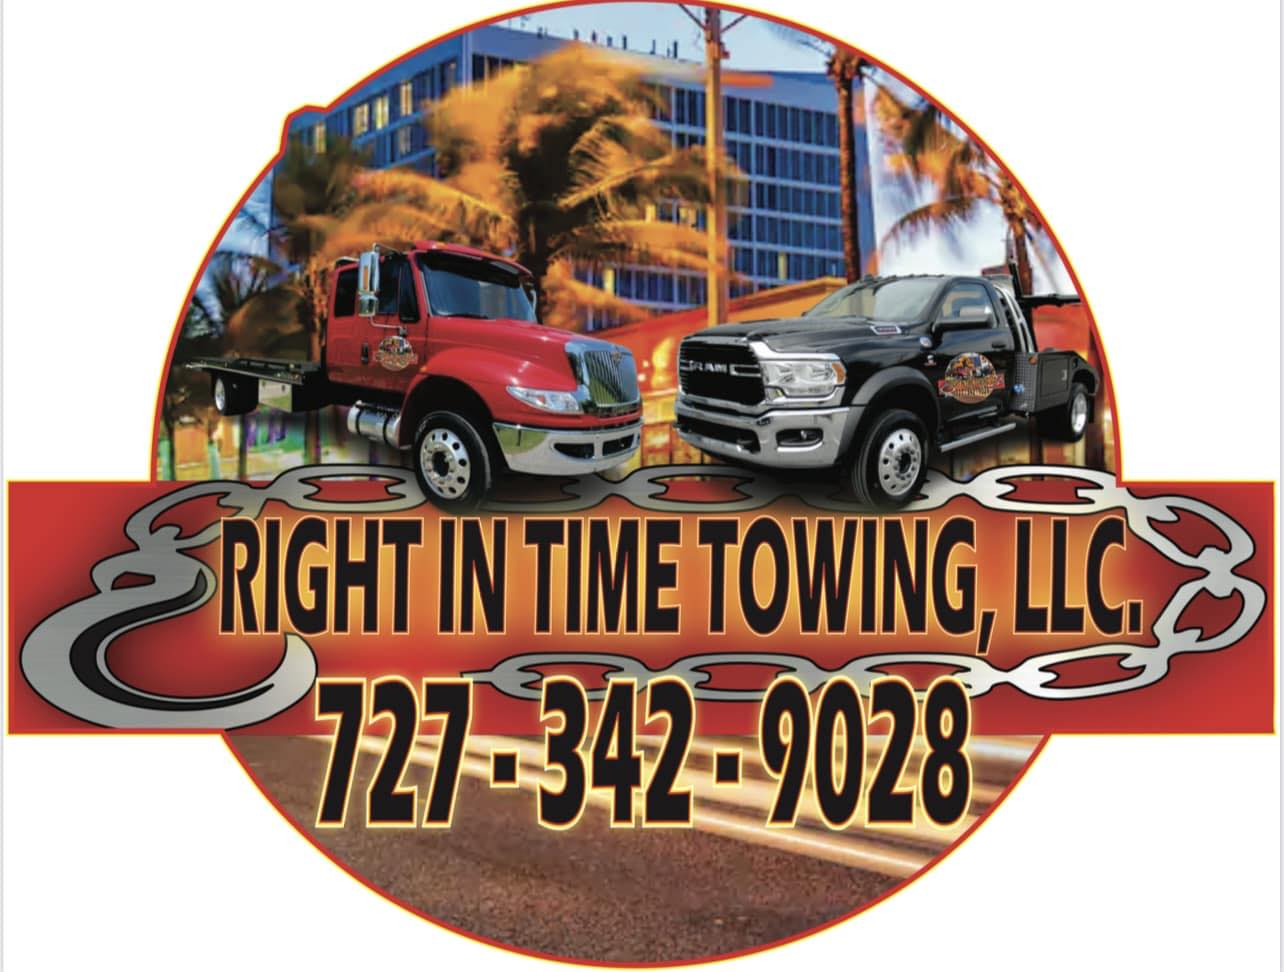 ST. PETERSBURG, GULFPORT, CLEARWATER FL & PINELLAS COUNTY towing near me We Buy Junk Cars